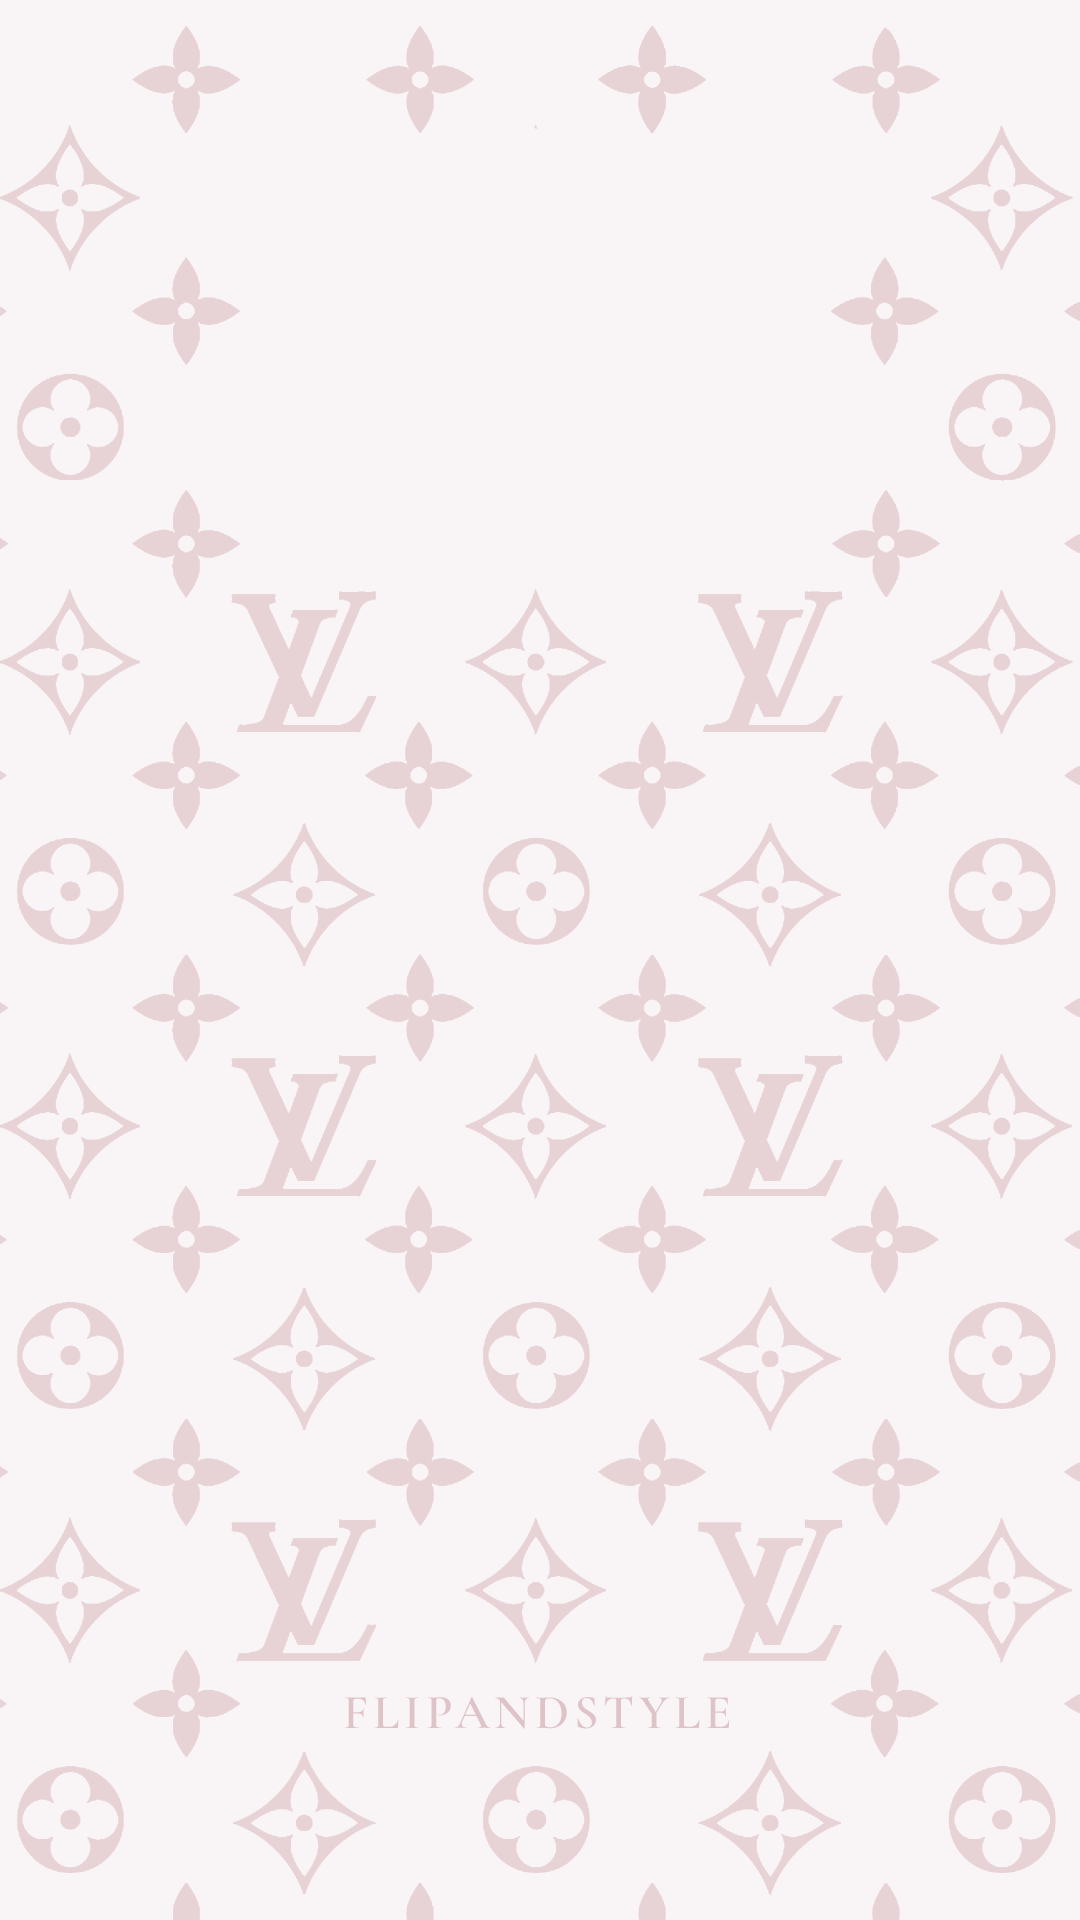 Aesthetic pink and white Louis Vuitton wallpaper that changes with the screen. - Louis Vuitton, royalcore